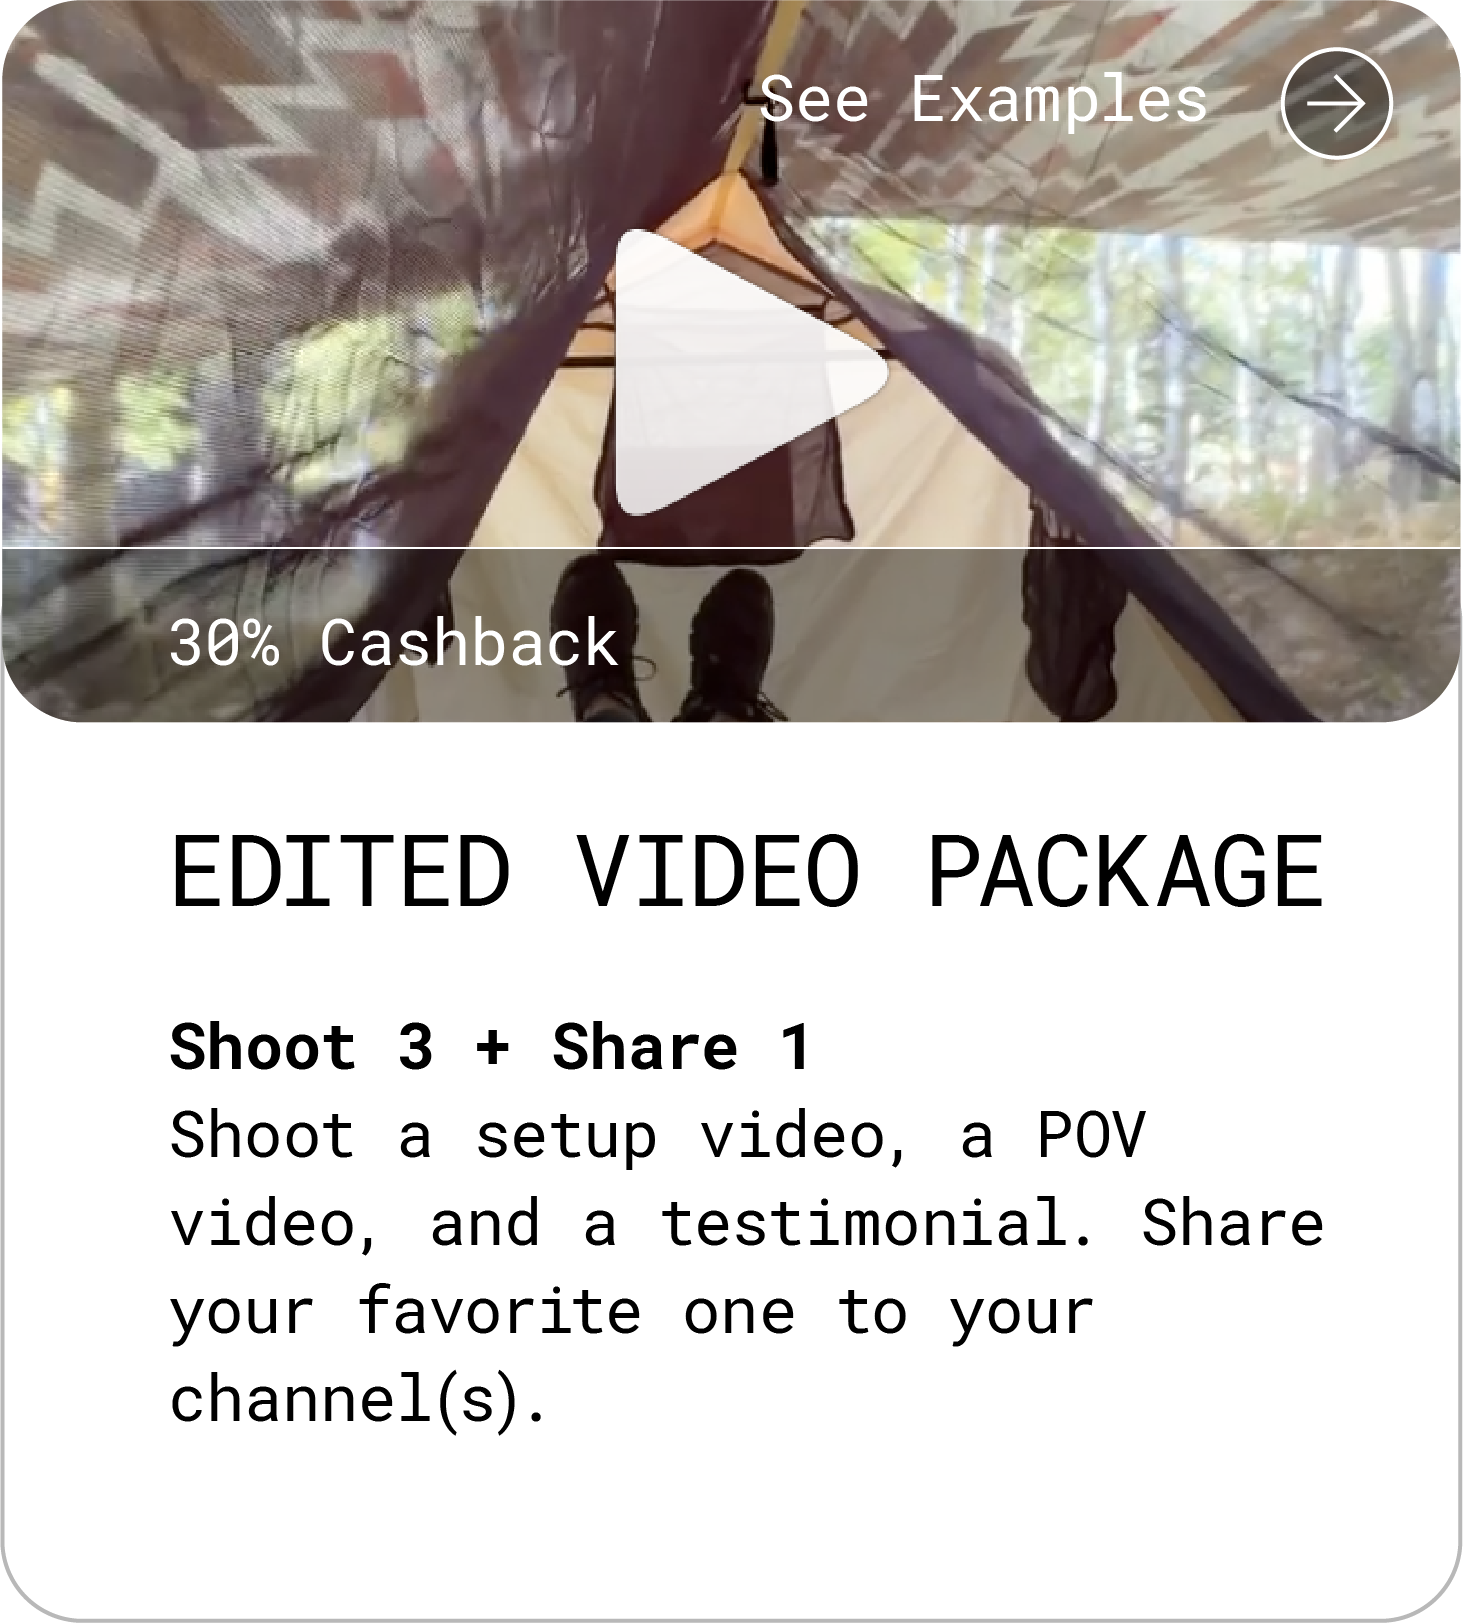 Edited Video Package (30% Cashback). Shoot 3, Share 1 Shoot a setup video, a POV video, and a testimonial. Share your favorite one to your channel(s). See Examples.